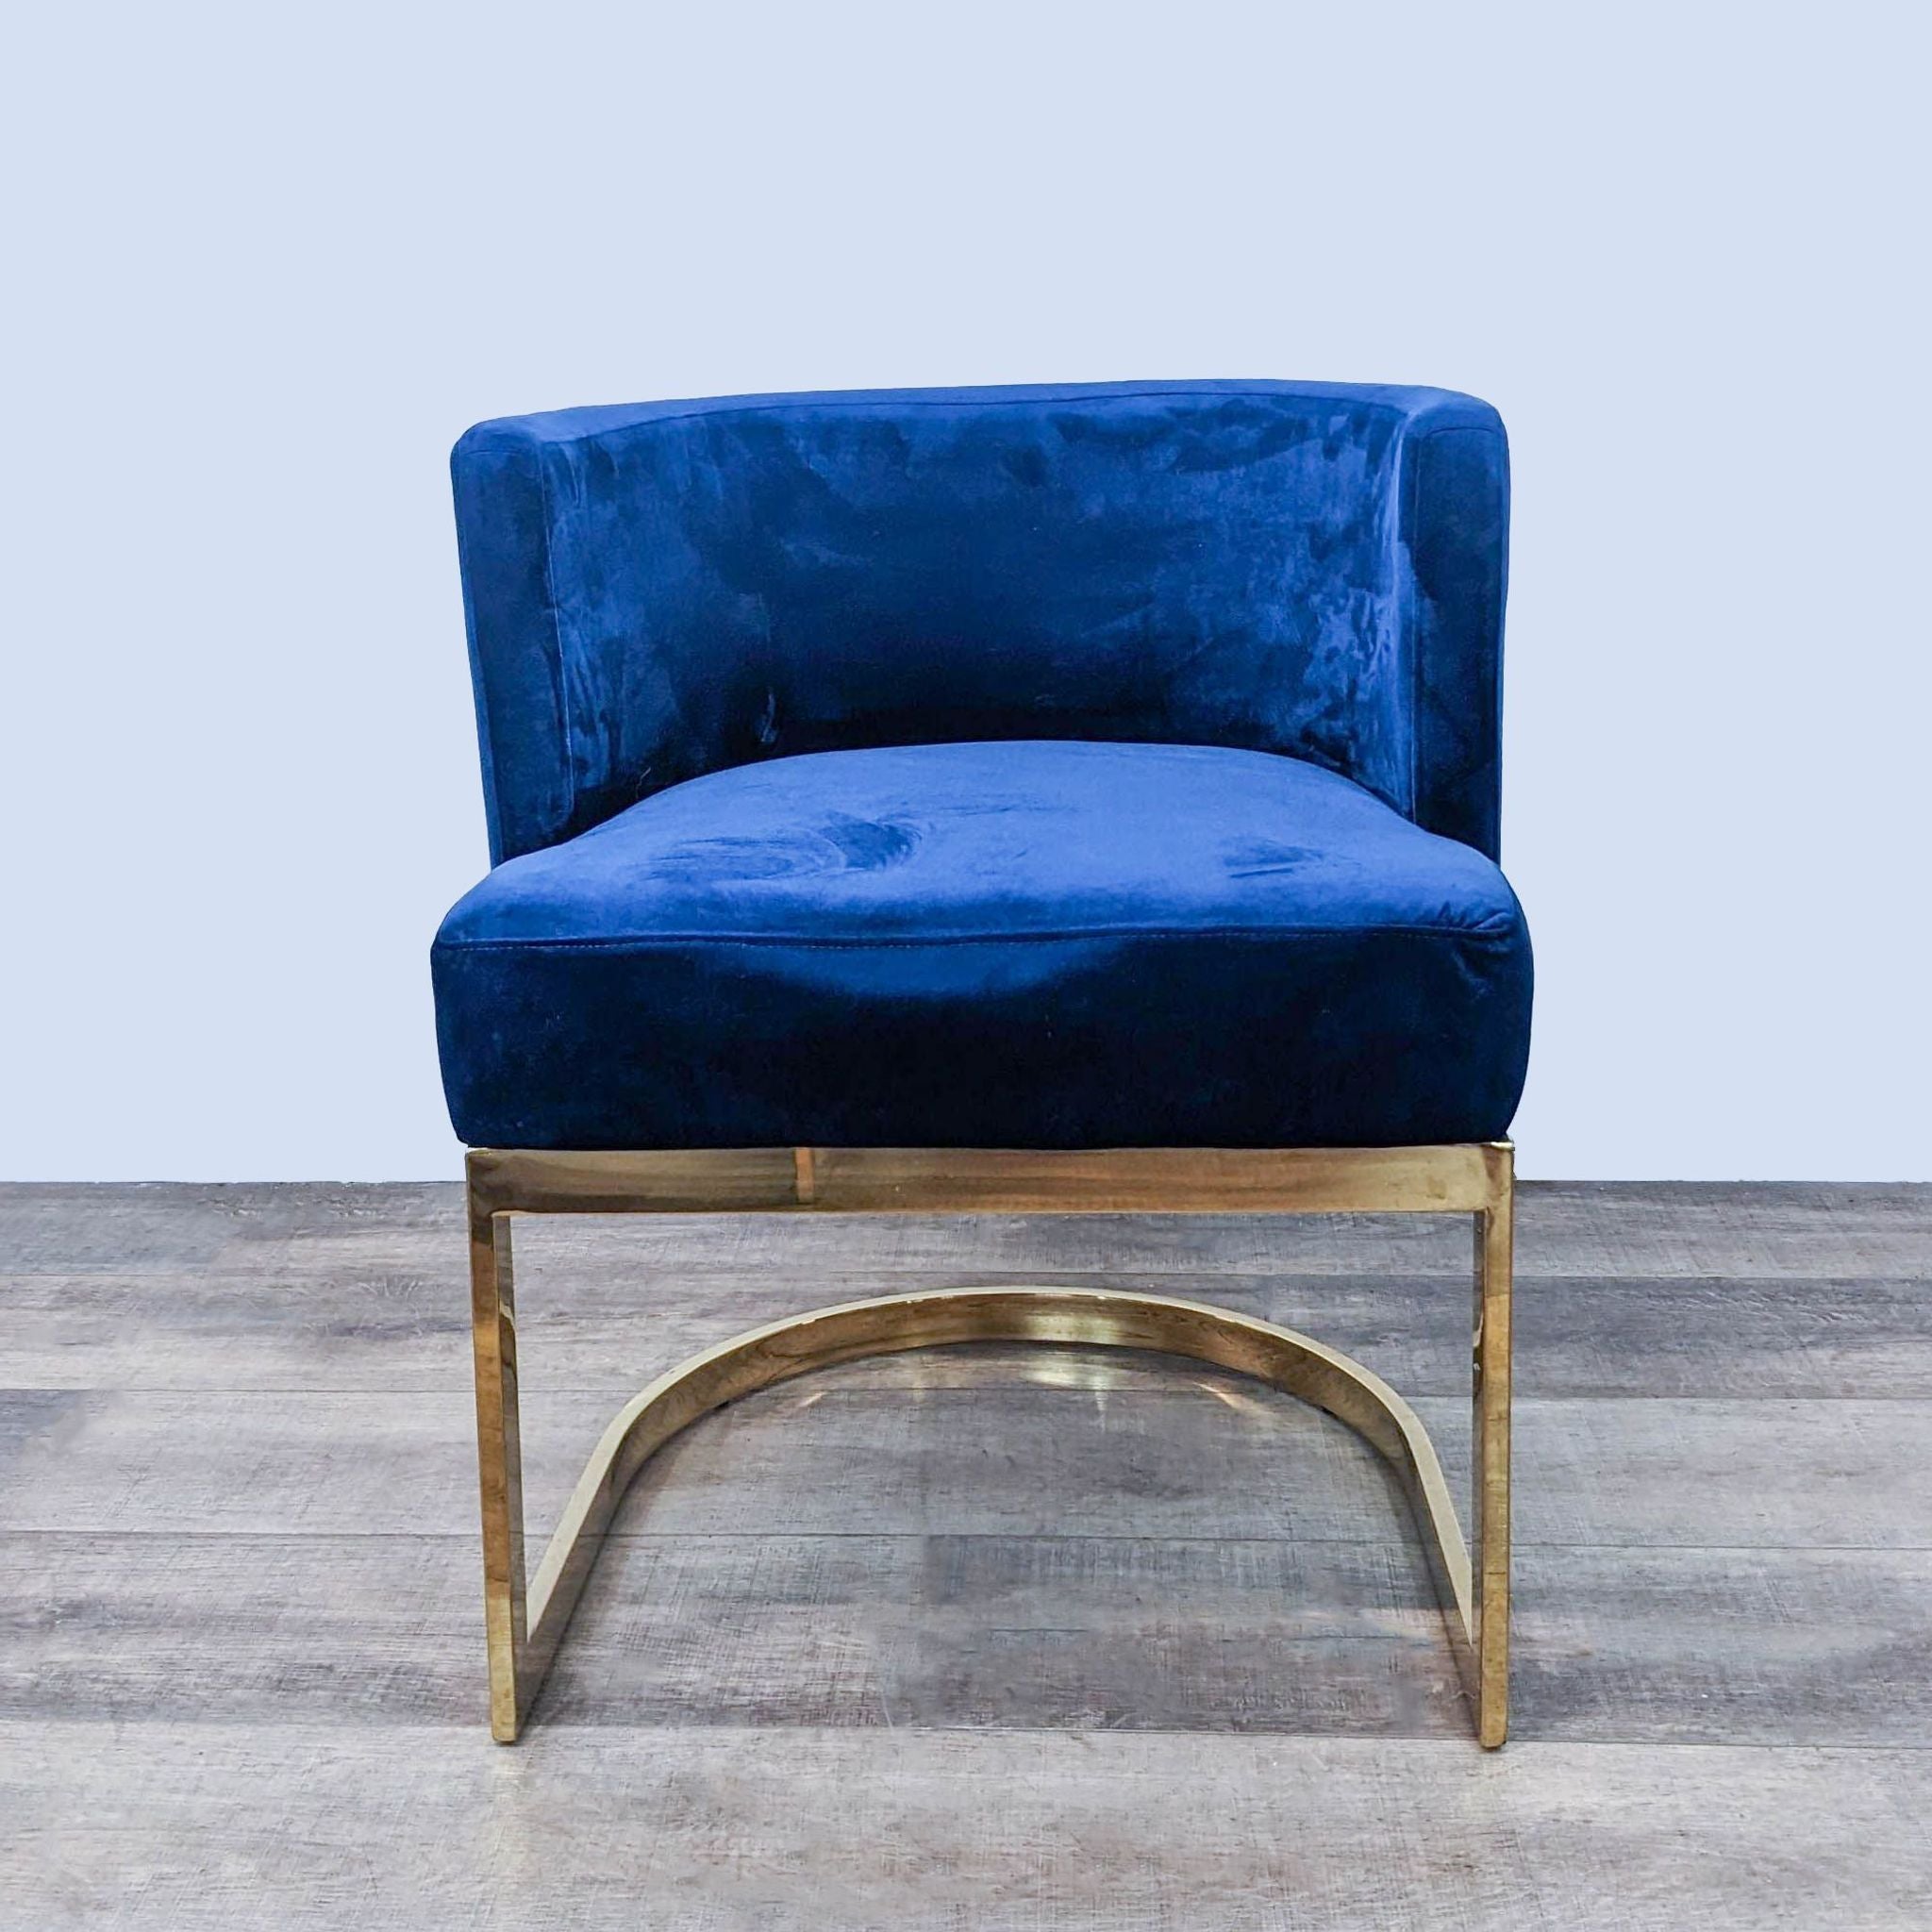 Plush navy blue velvet dining chair by Meridian Furniture with a U-shaped gold stainless steel base.